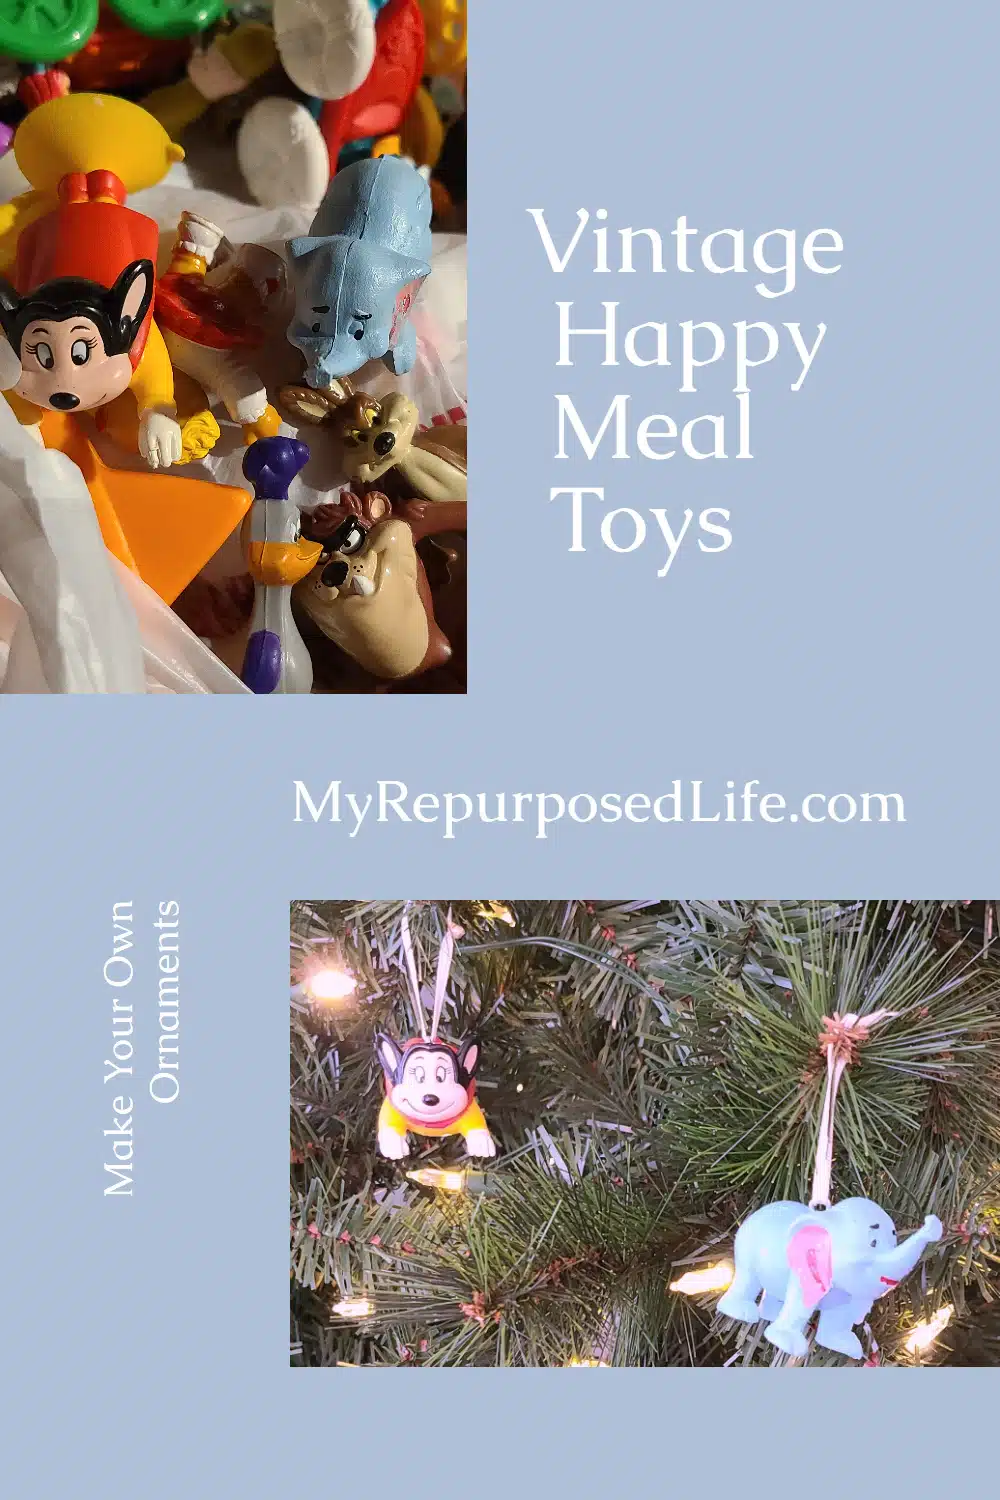 Easy project-how to make ornaments out of happy meal toys or your child's favorite action figures. Step by step directions to make your own today! #MyRepurposedLife #repurposed #happymealtoys #actionfigures #playset #diy #ornaments via @repurposedlife